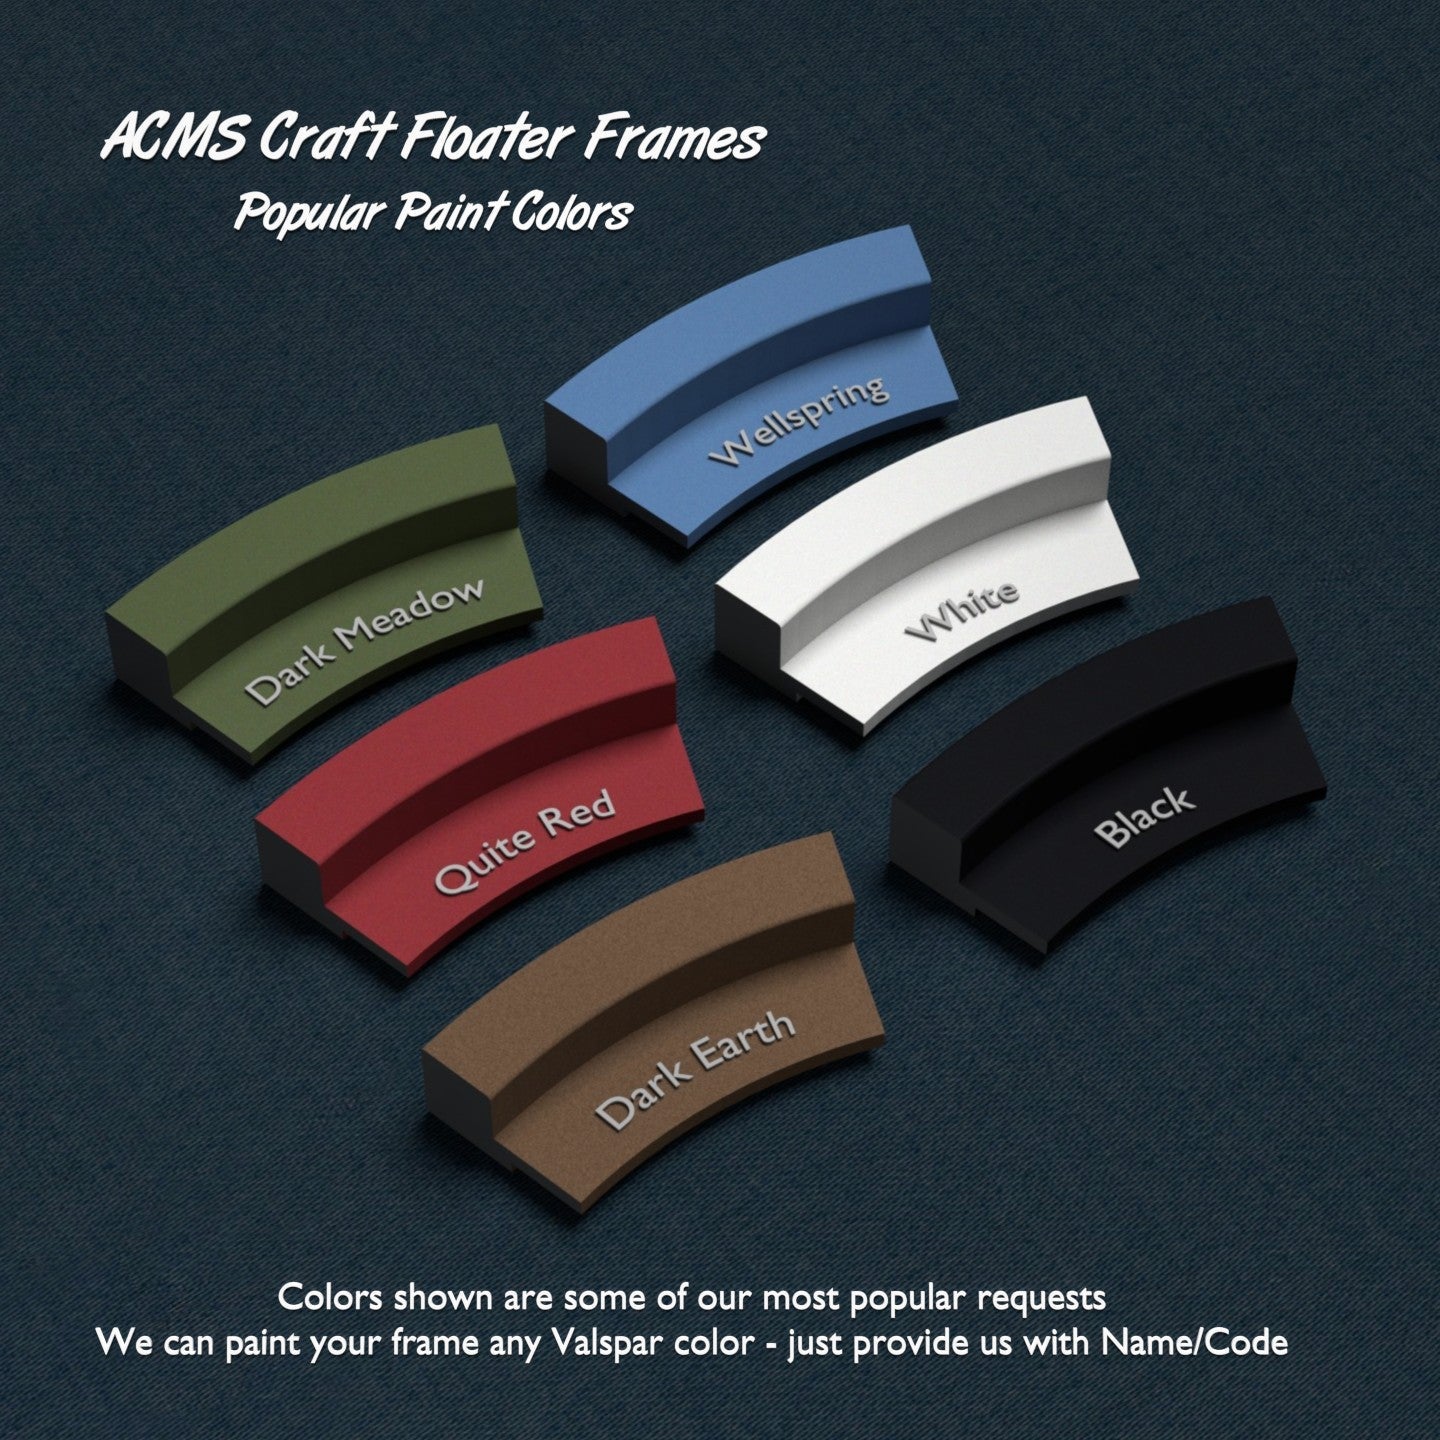 ACMS Capsule Craft Floater Frame - For 3/4" Thick Artwork - Profile 1/2" FLAT - 1 1/4" Thick Frame